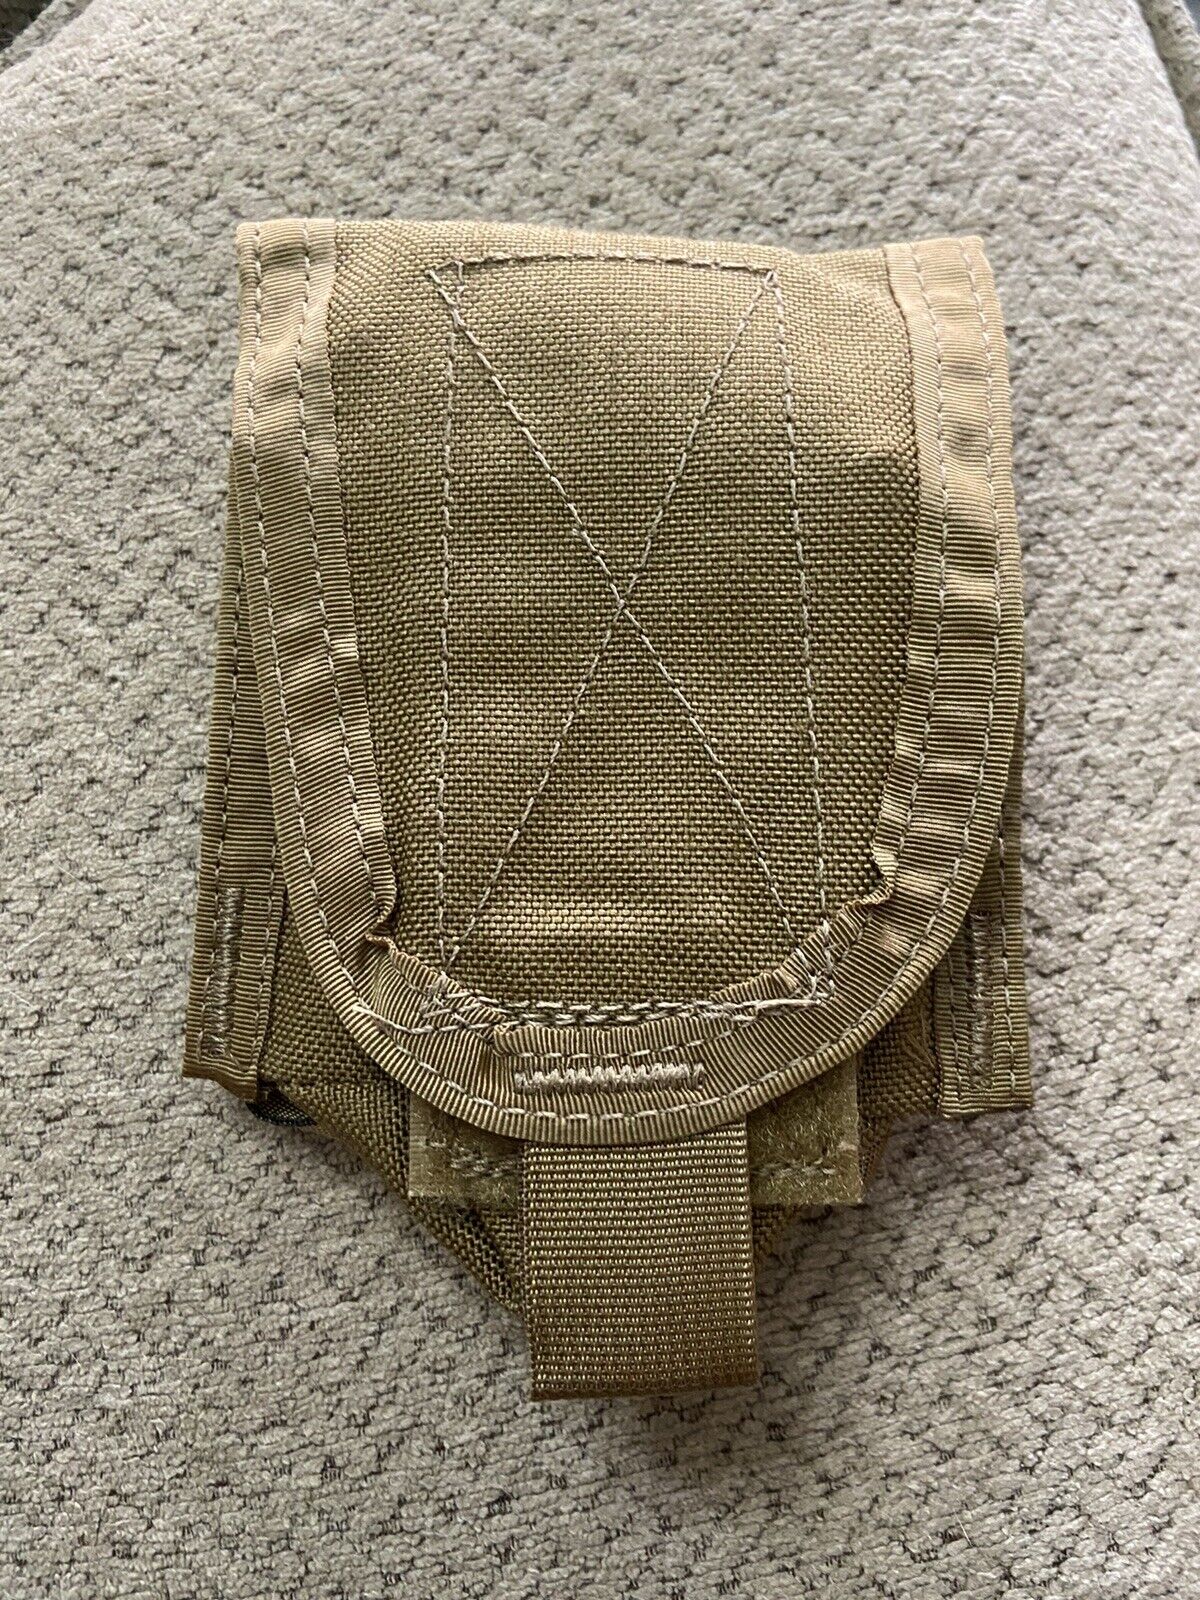 MSA Paraclete Grenade Pouch #RSFG0815 Smoke Tan Made In USA